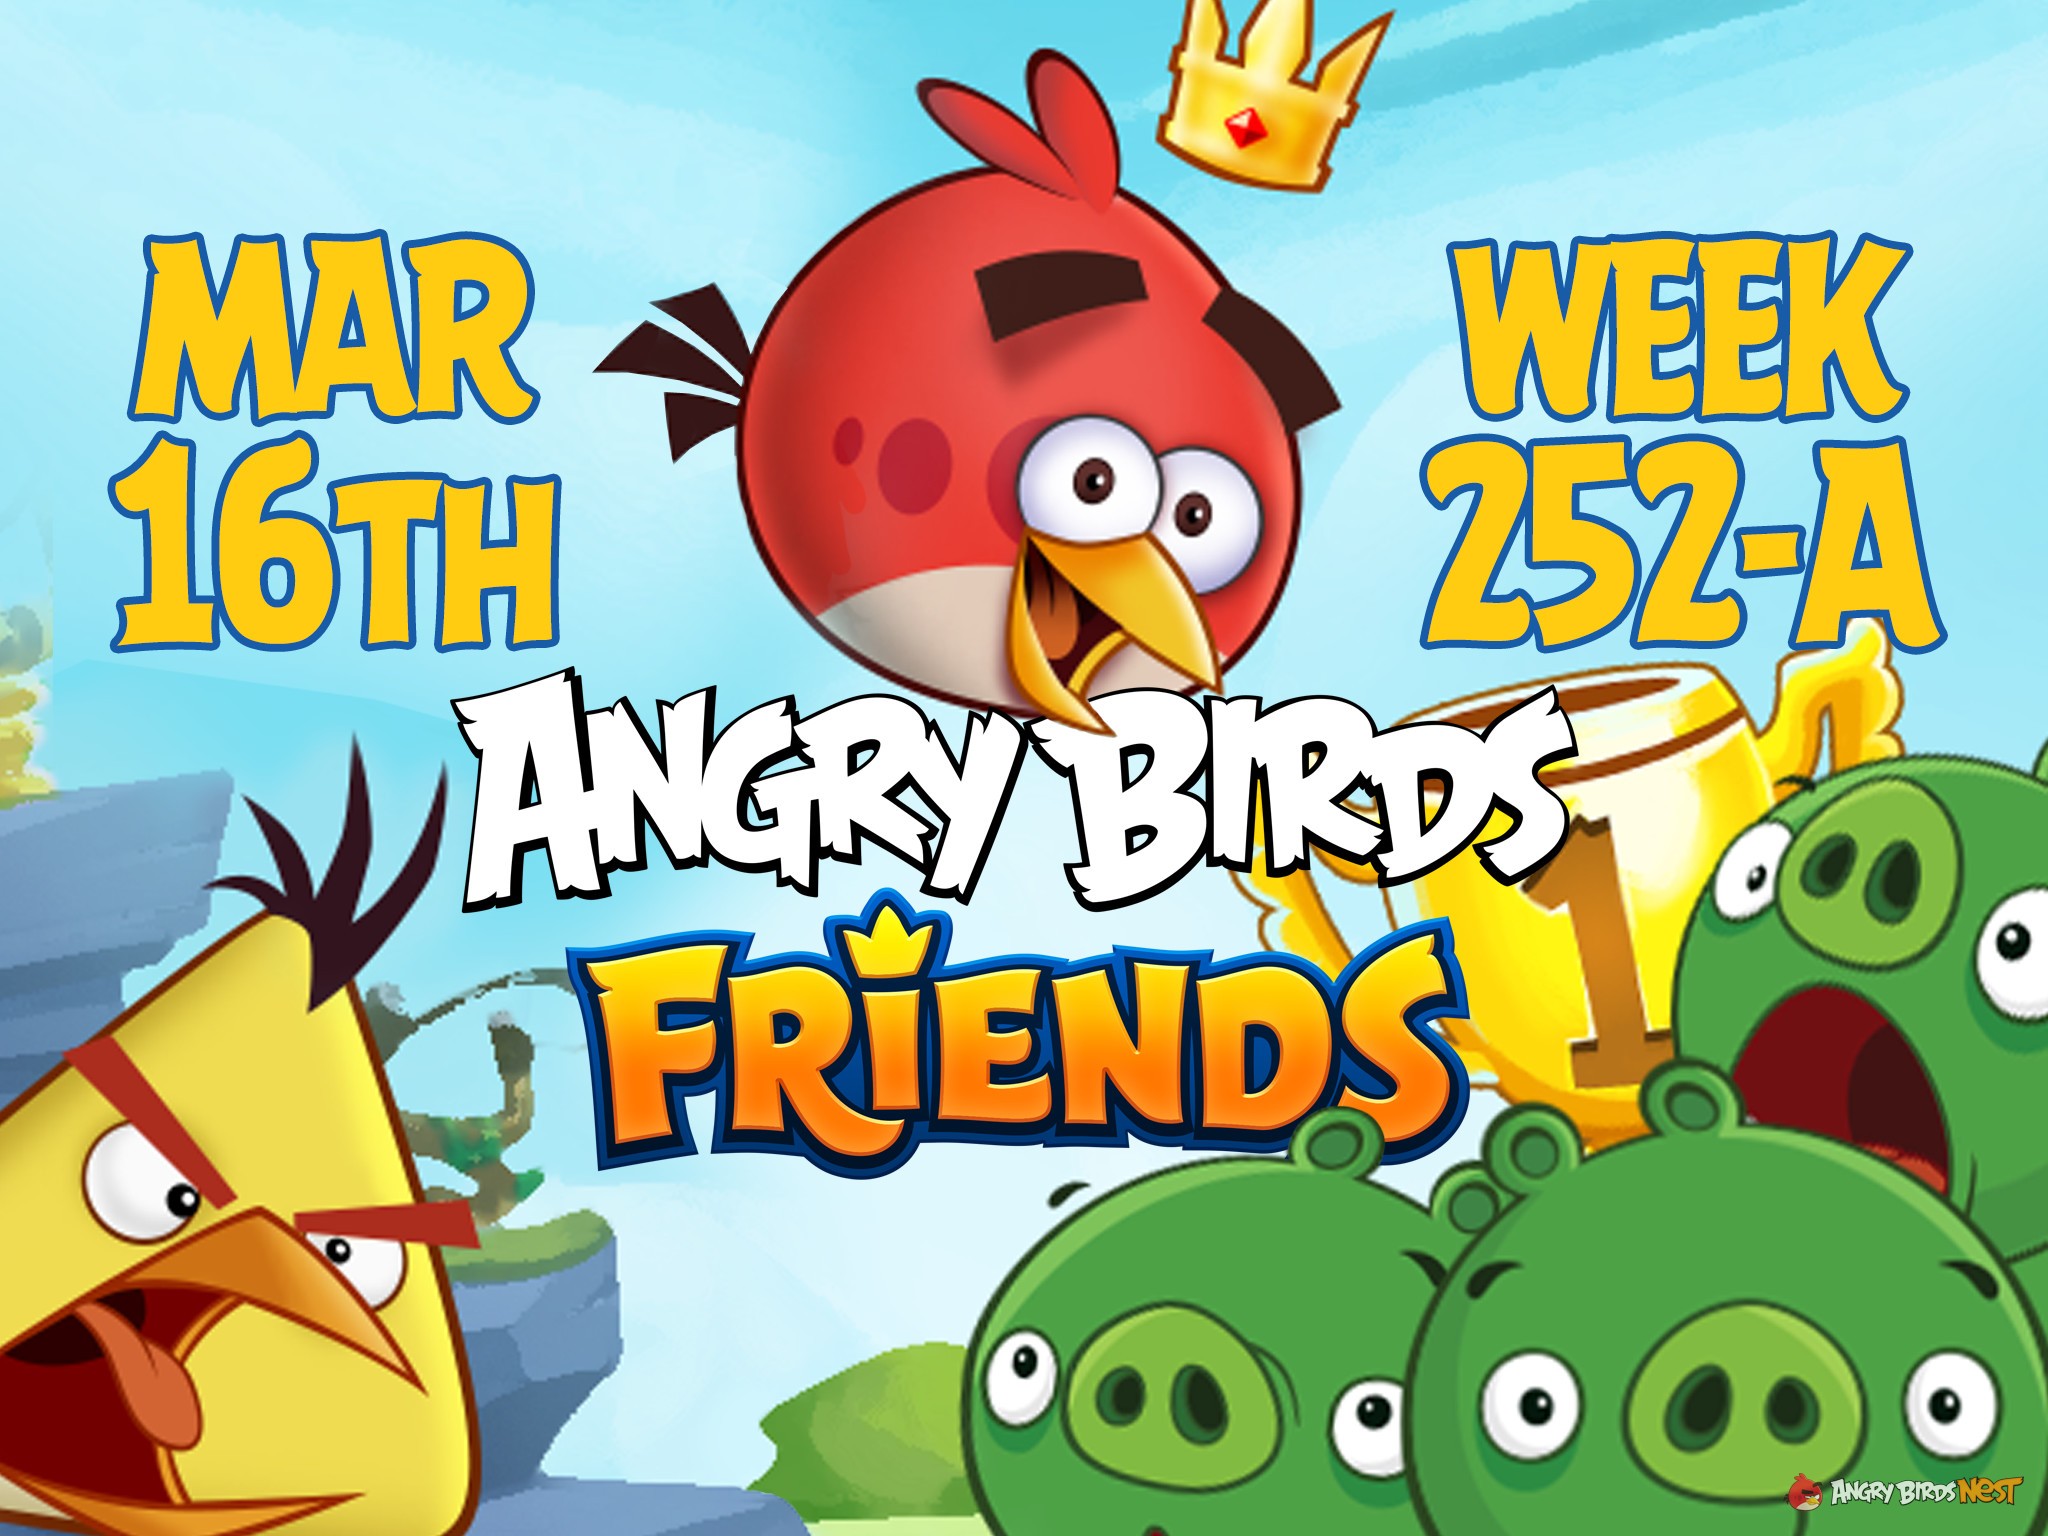 Angry Birds Friends Tournament Week 252-A Feature Image